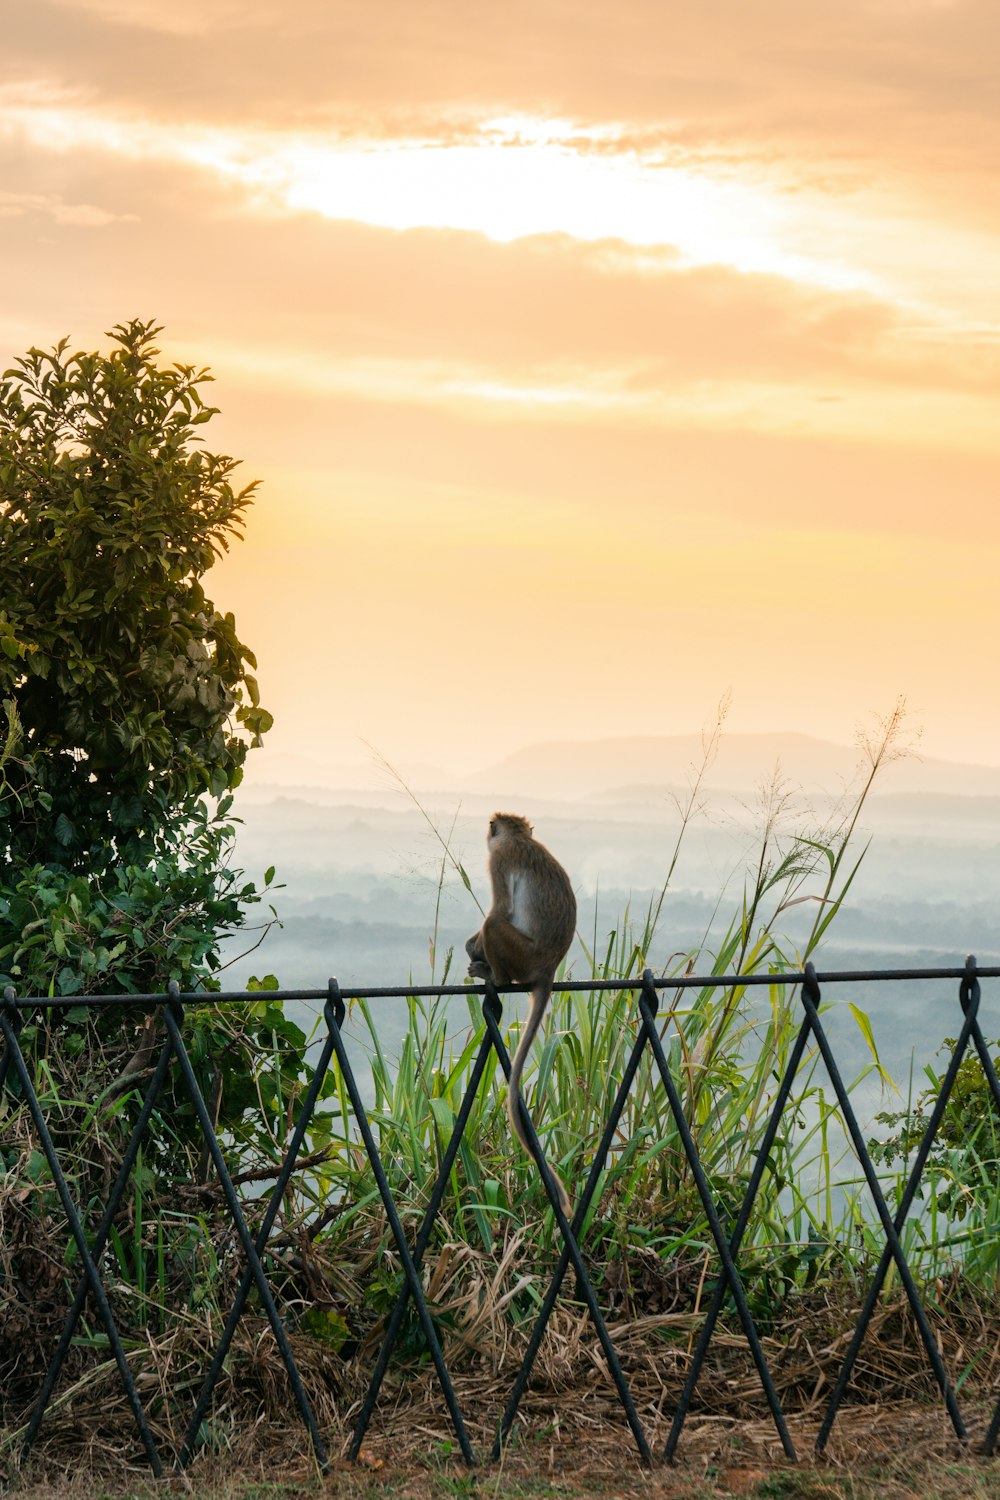 a monkey sitting on top of a metal fence